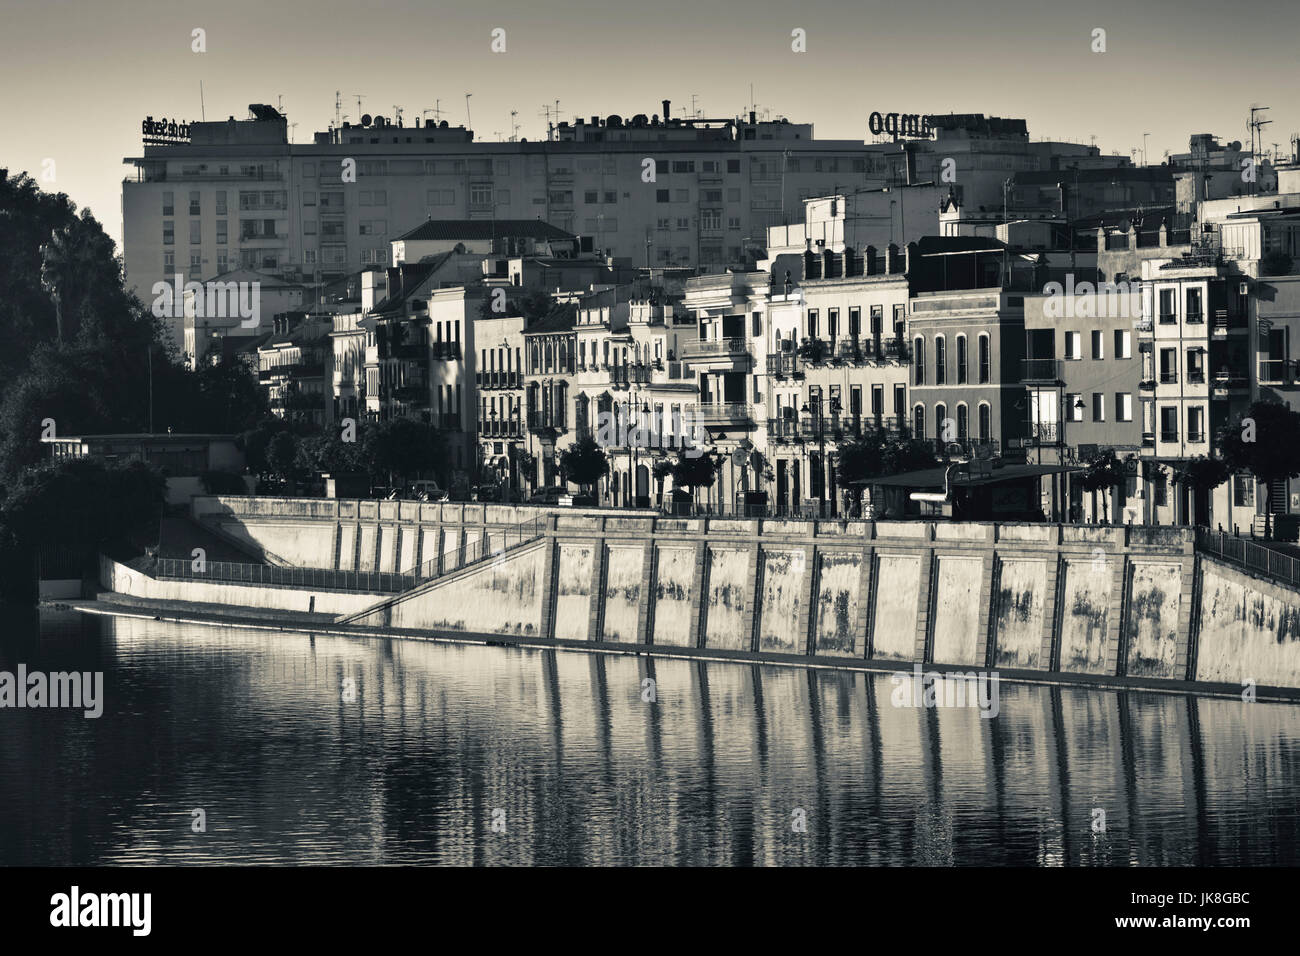 Spain, Andalucia Region, Seville Province, Seville, Waterfront view along the Rio Guadalquivir River of the Triana area, dawn Stock Photo